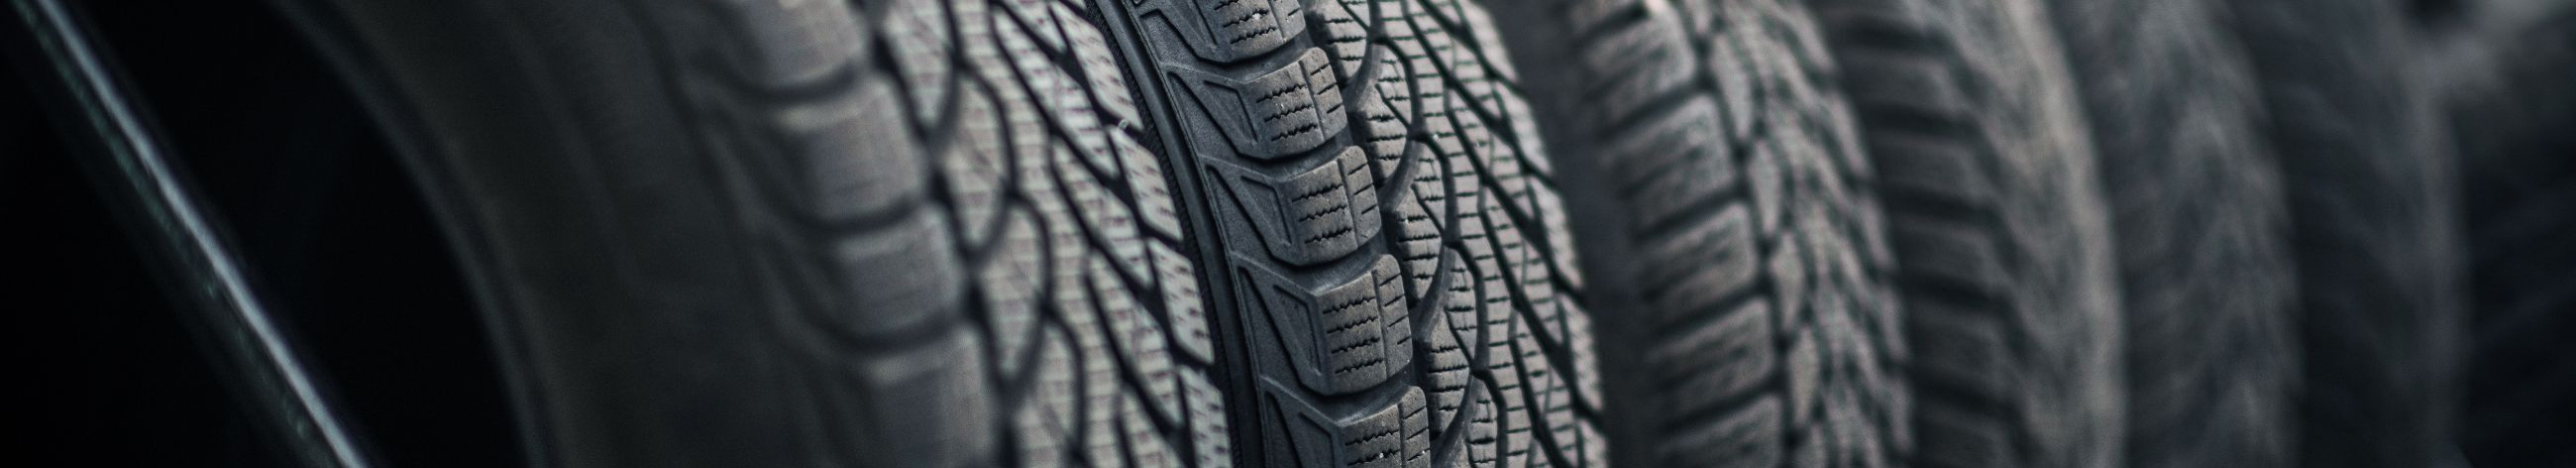 summer and winter tyres, tires for vans, Tyres for passenger cars, suv tyres, Tyres, lamellar tyres, studded tyres, tirework, tyre assembly, balancing of wheels